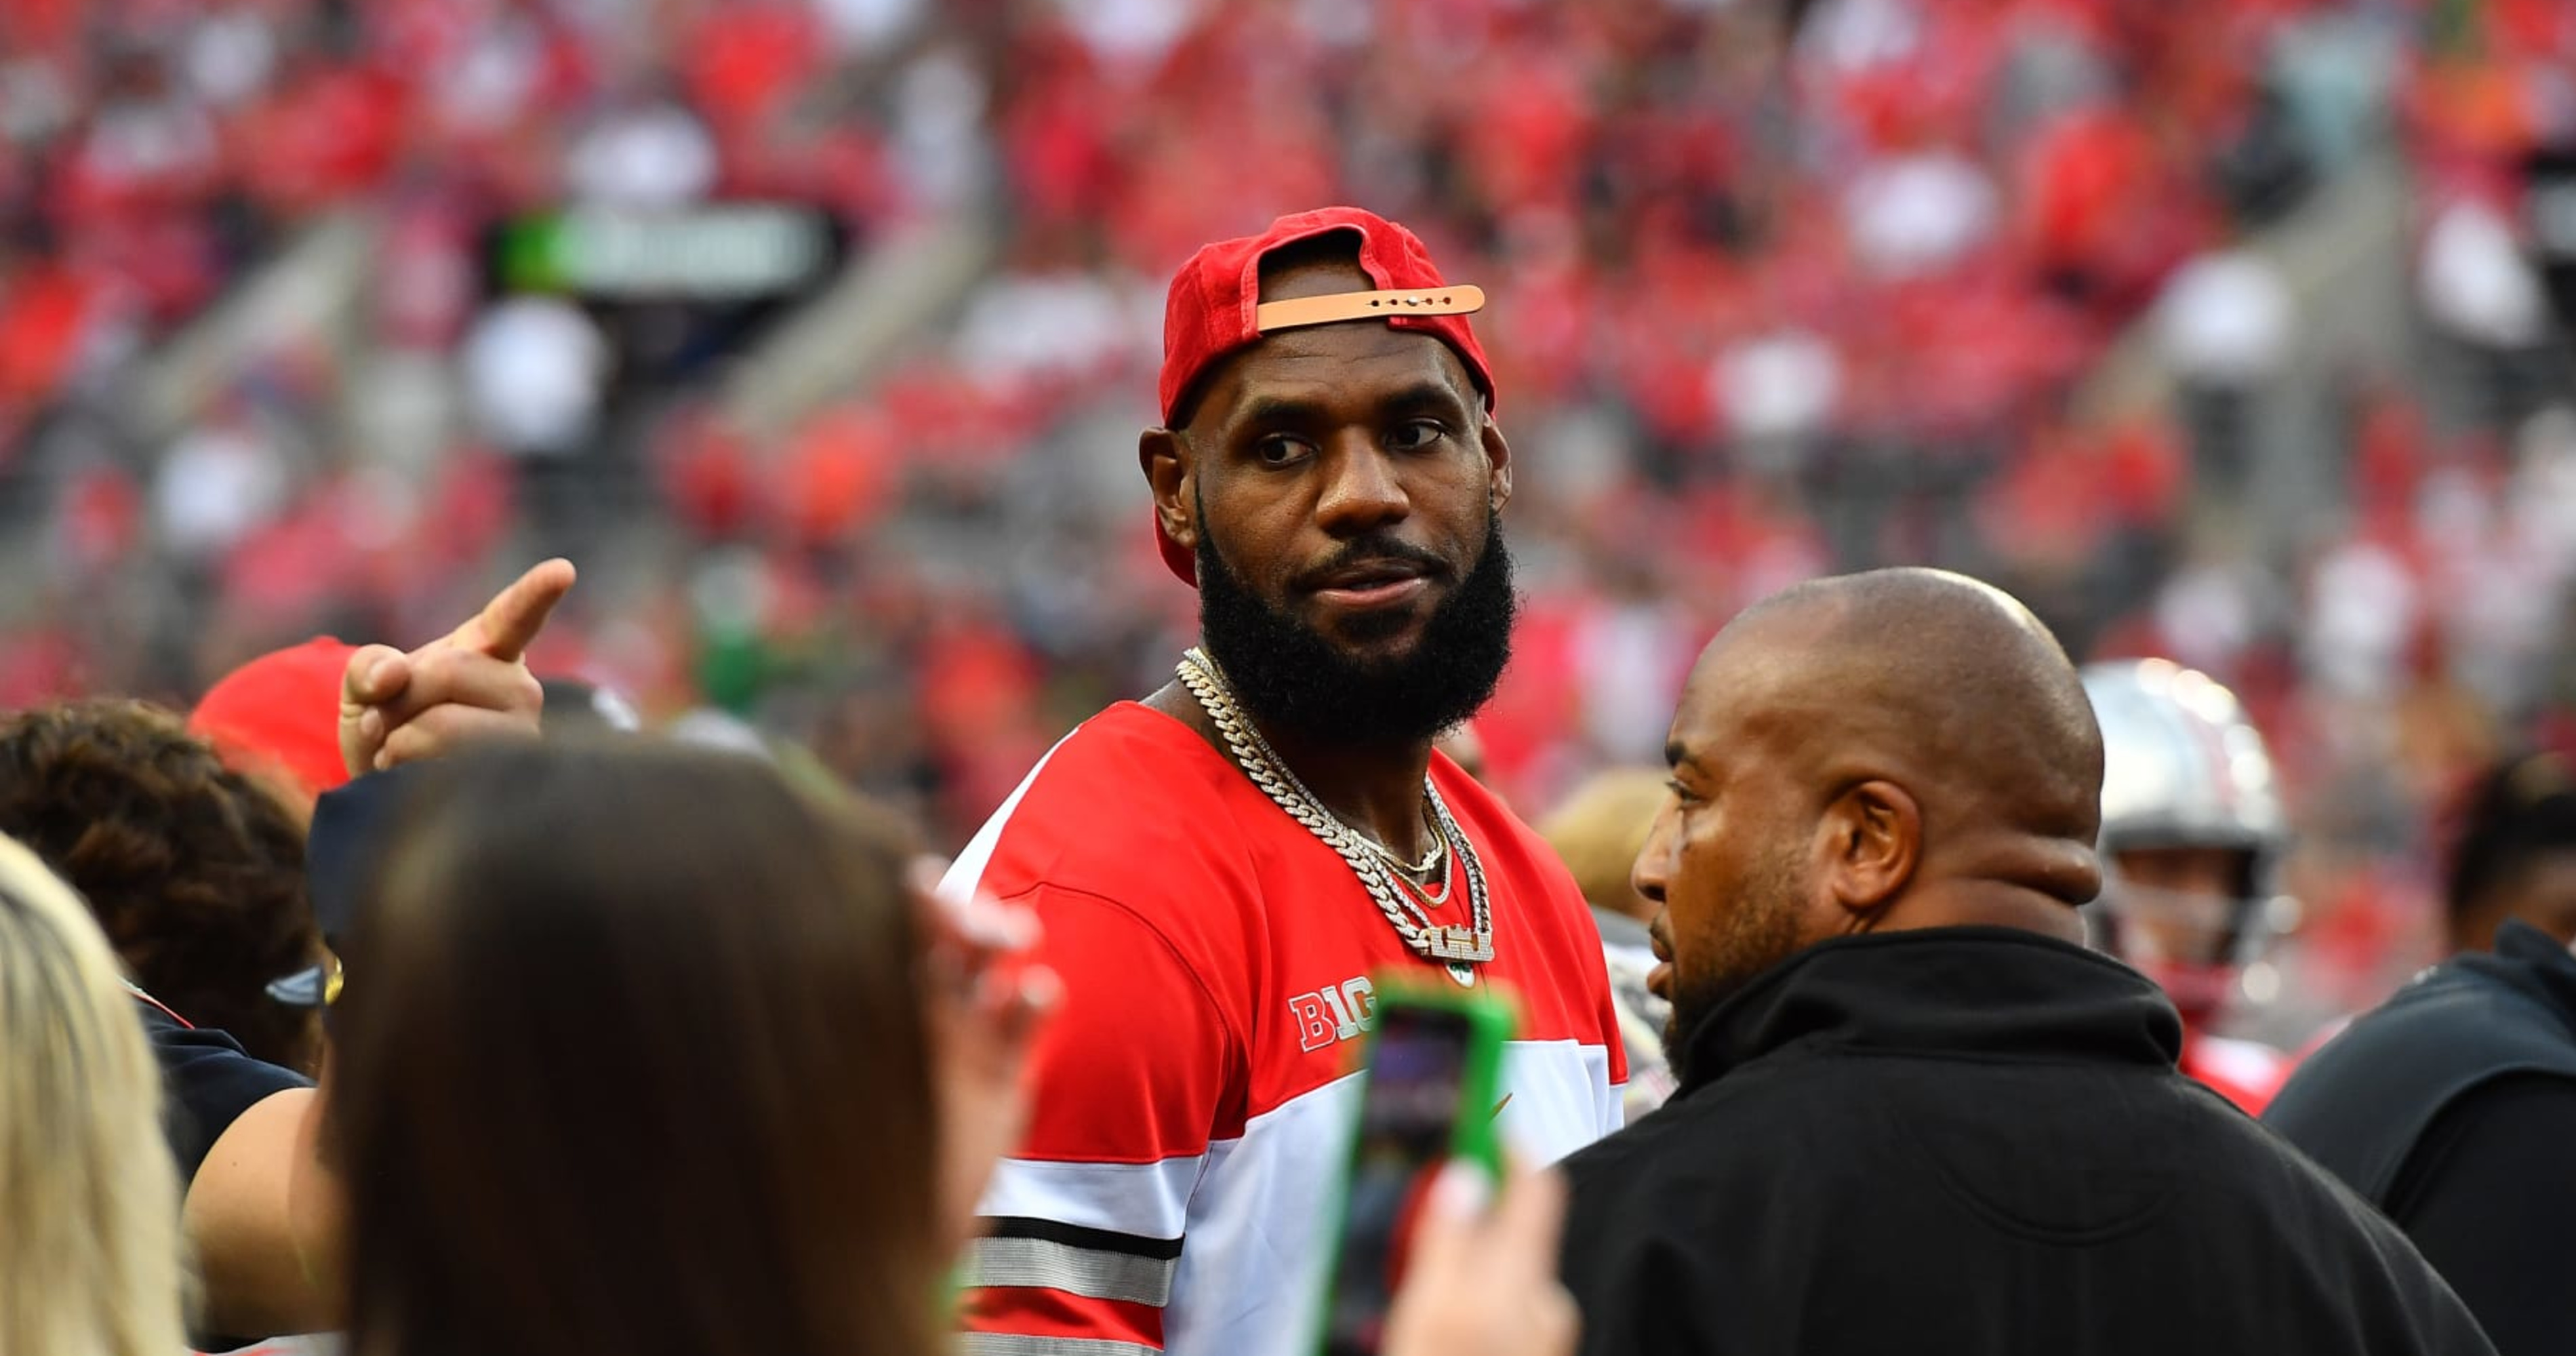 Lakers' LeBron James 'Absolutely' Thinks about Playing in March Madness Every Year